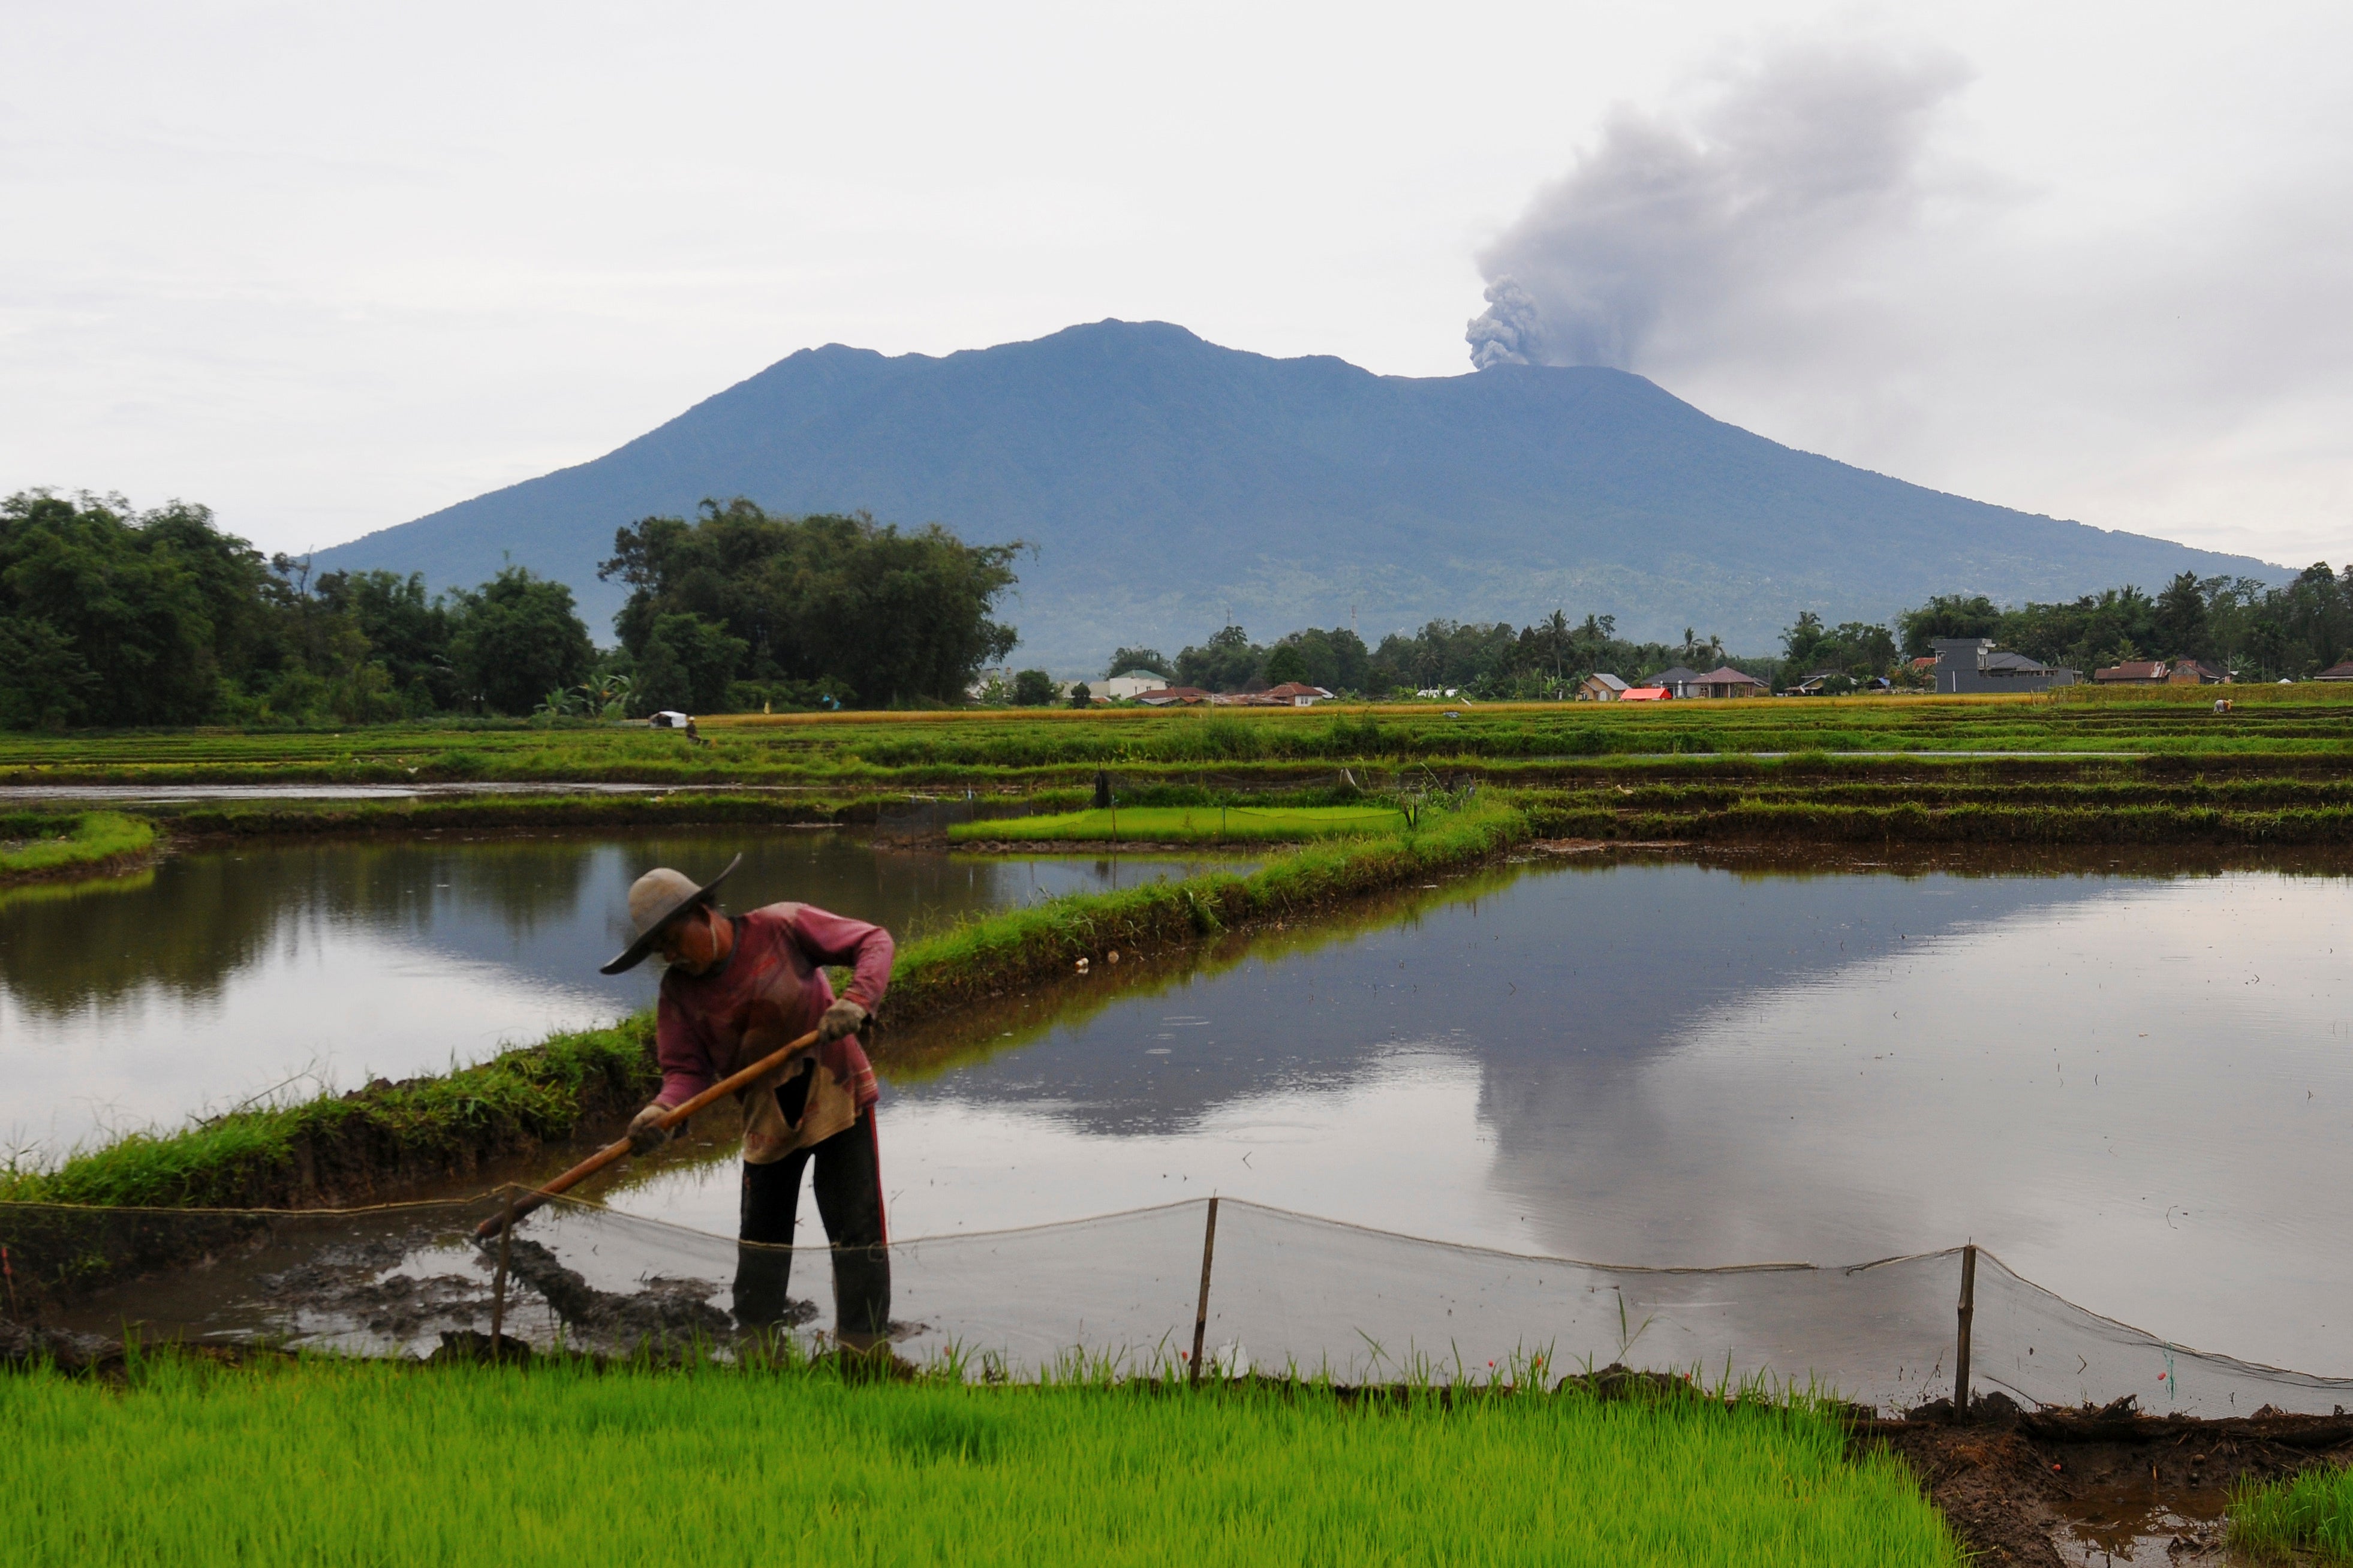 A farmer tends to his rice field as Mount Marapi spews volcanic material into the air in Agam, West Sumatra